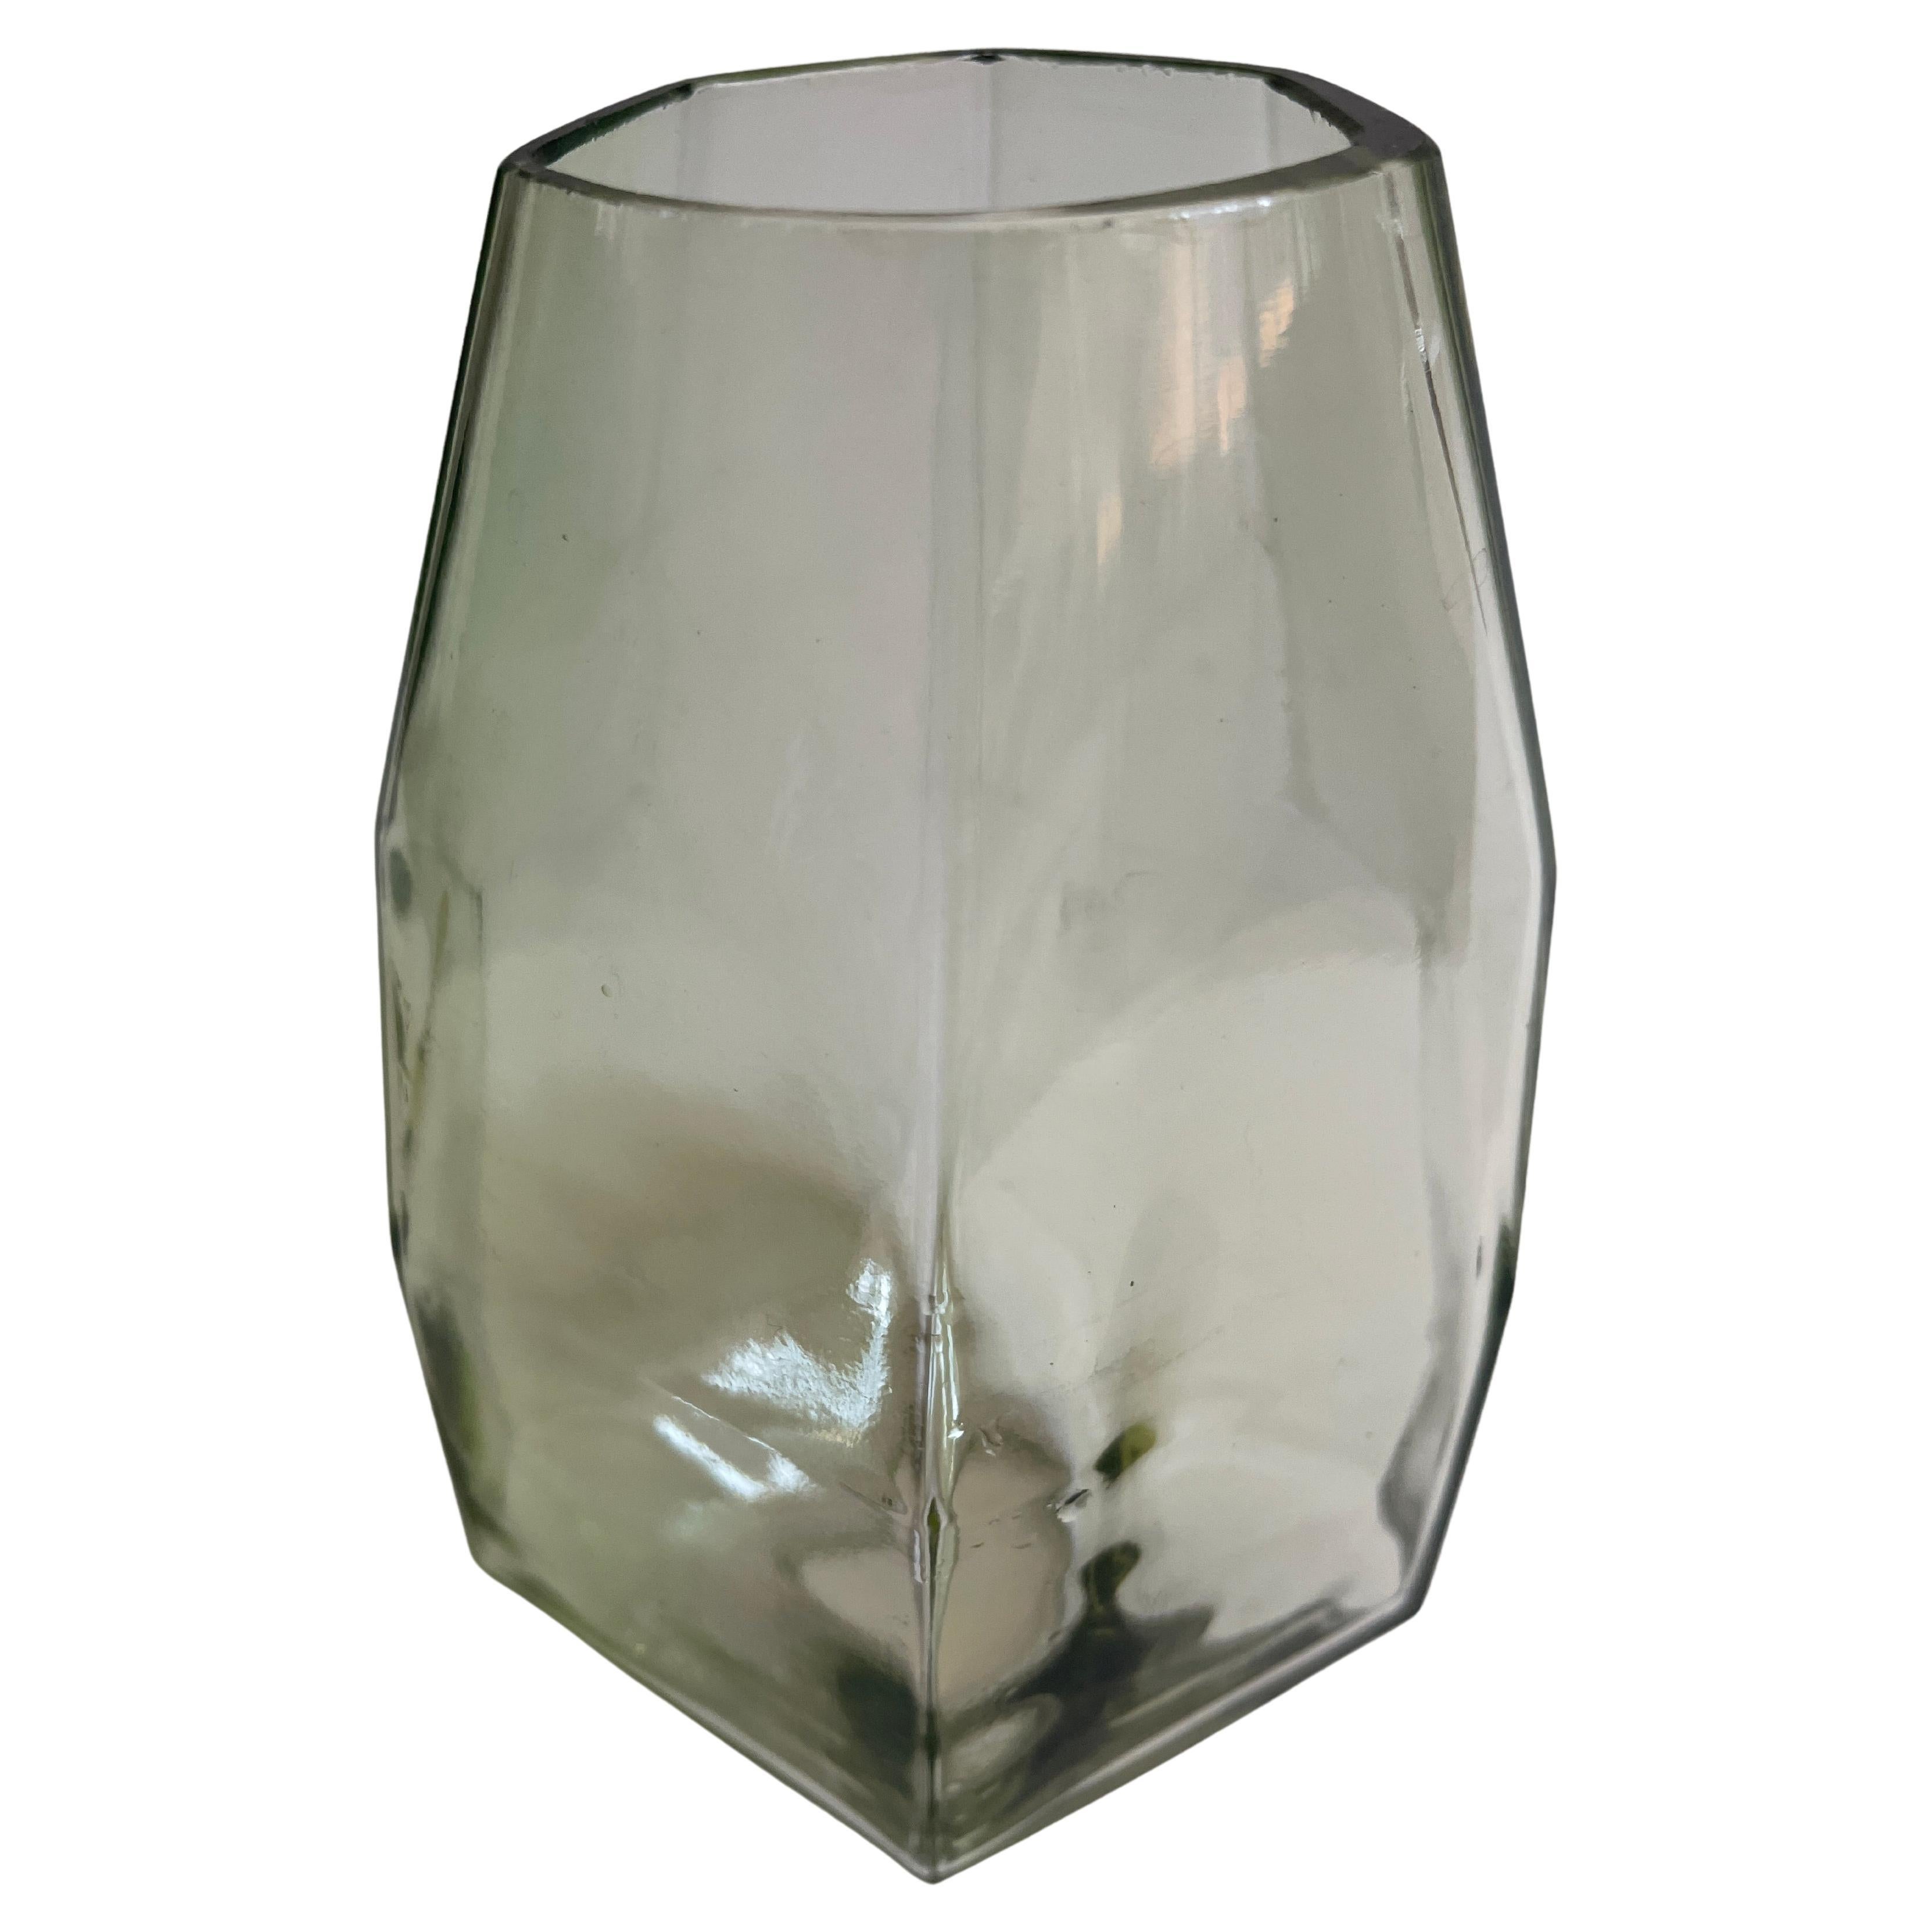 Polyhedric Danish molded glass vase has an ethereal celadon color, catching the light at many angles.